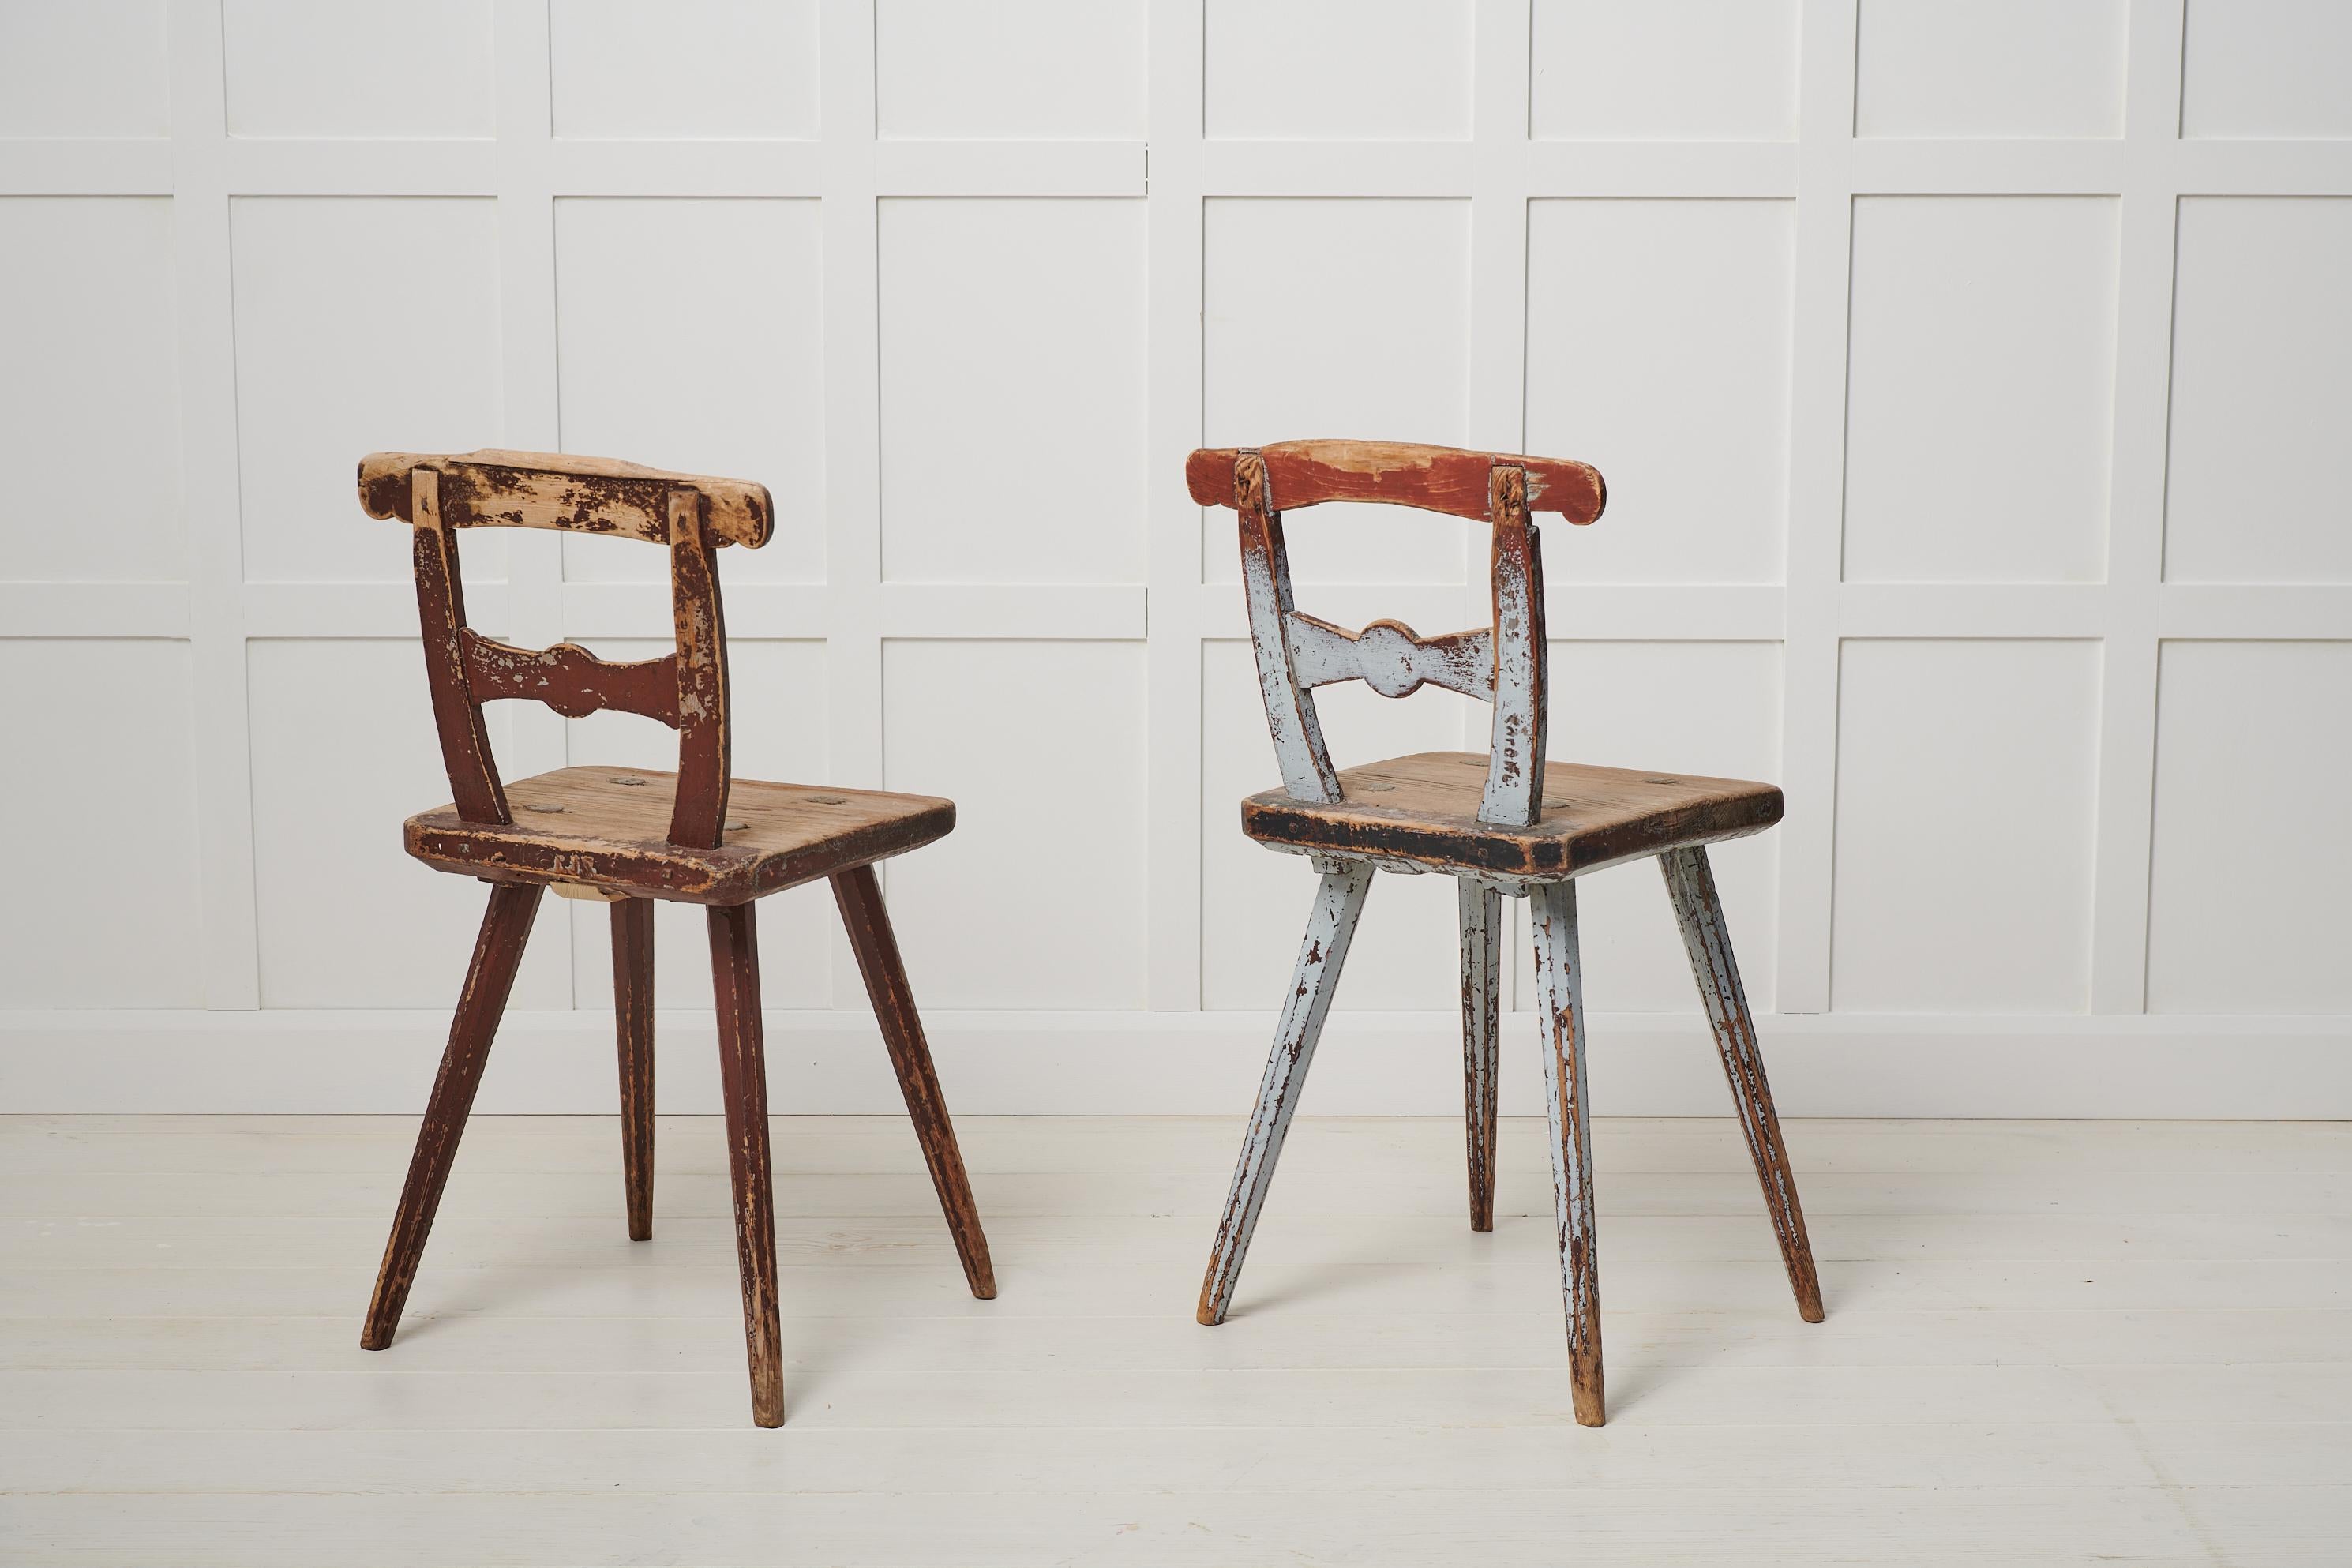 Hand-Crafted Pair of Northern Swedish Charming Folk Art Chairs 